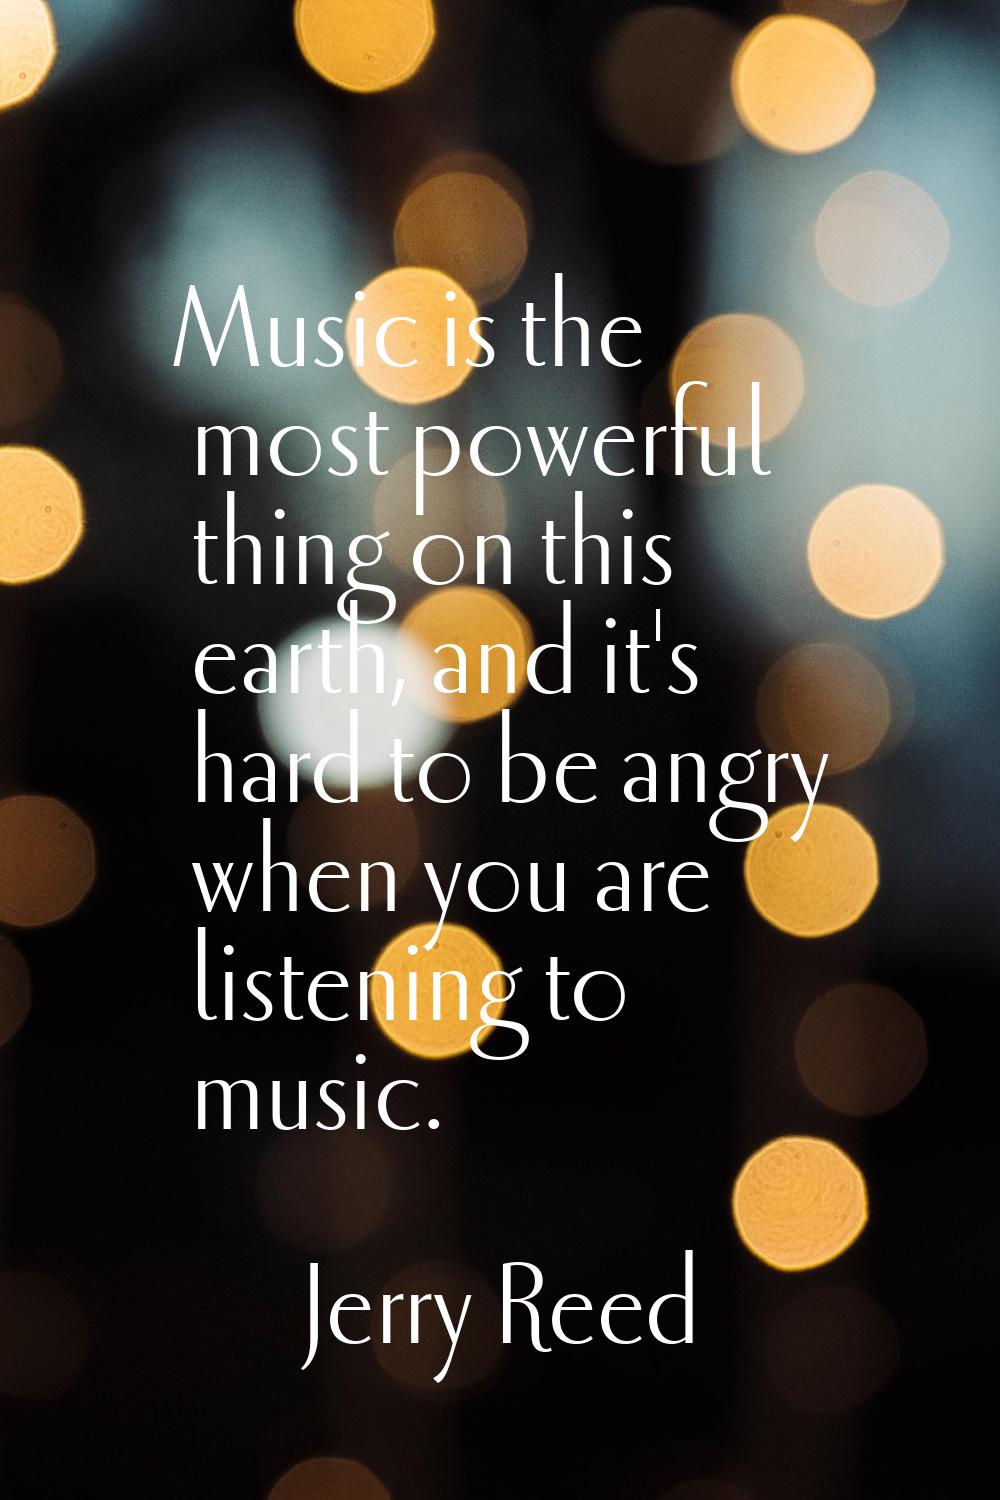 Music is the most powerful thing on this earth, and it's hard to be angry when you are listening to